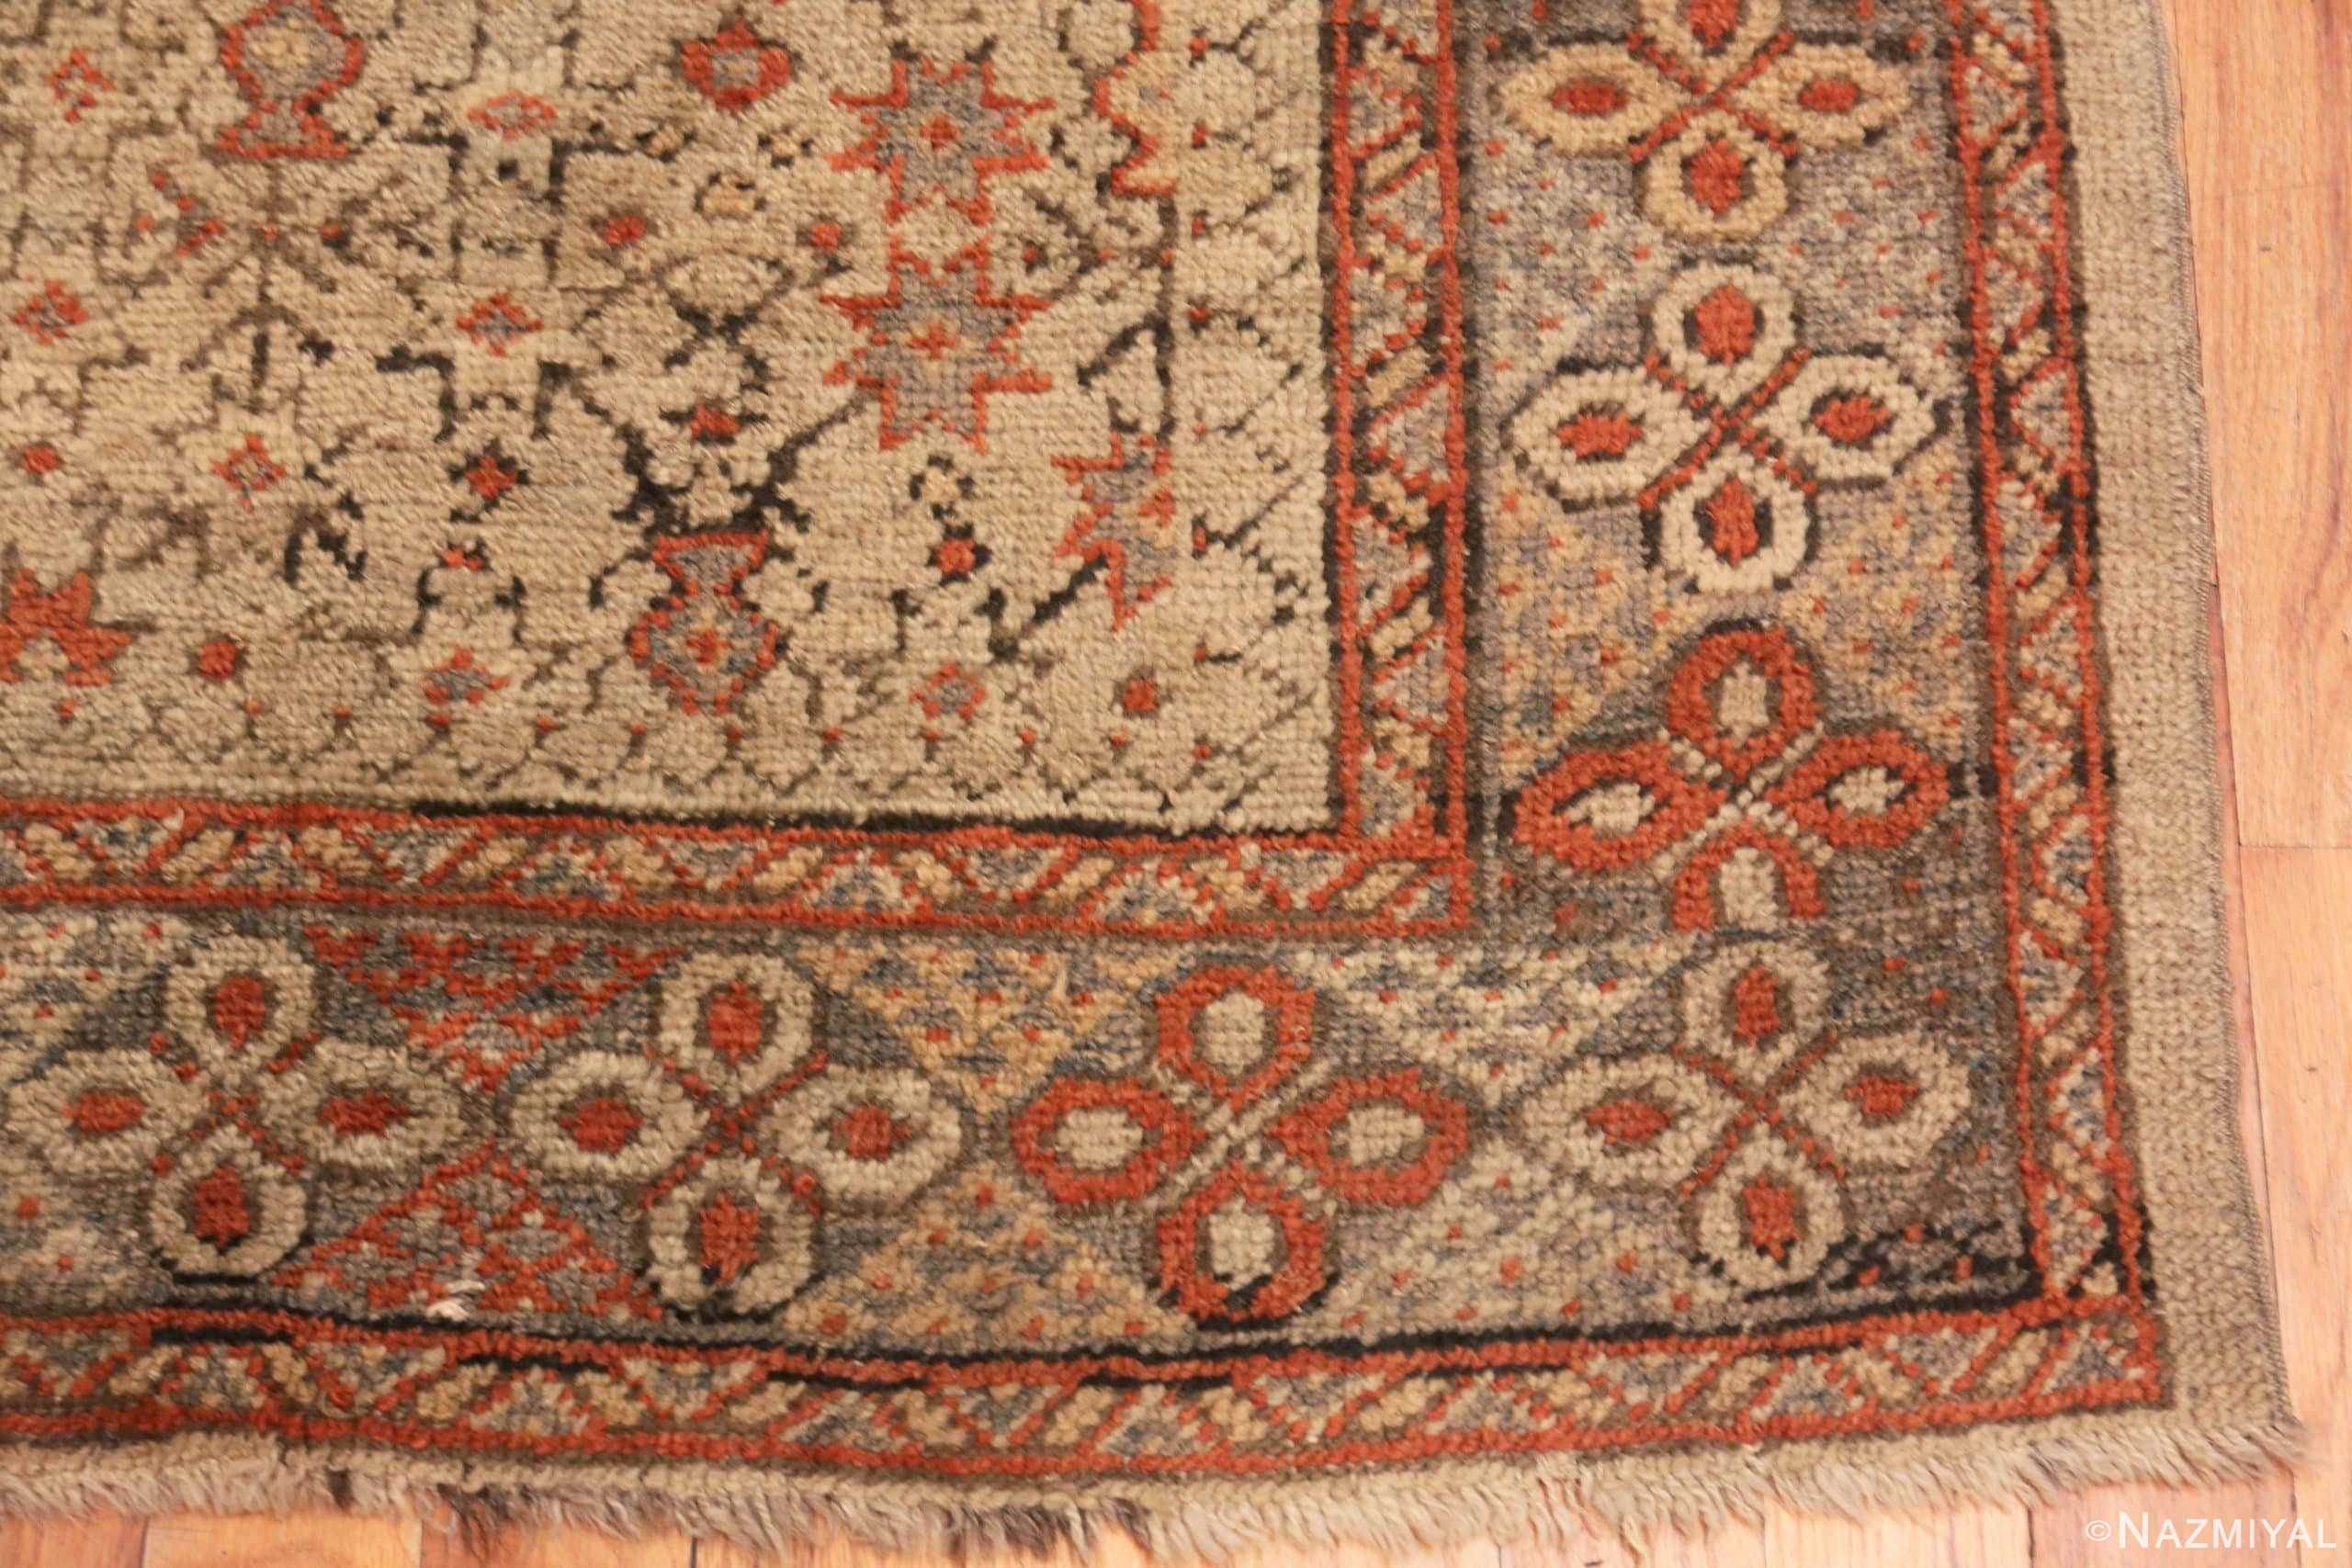 Corner Of Square Antique Turkish Ghiordes Tribal Rug 70873 by Nazmiyal Antique Rugs